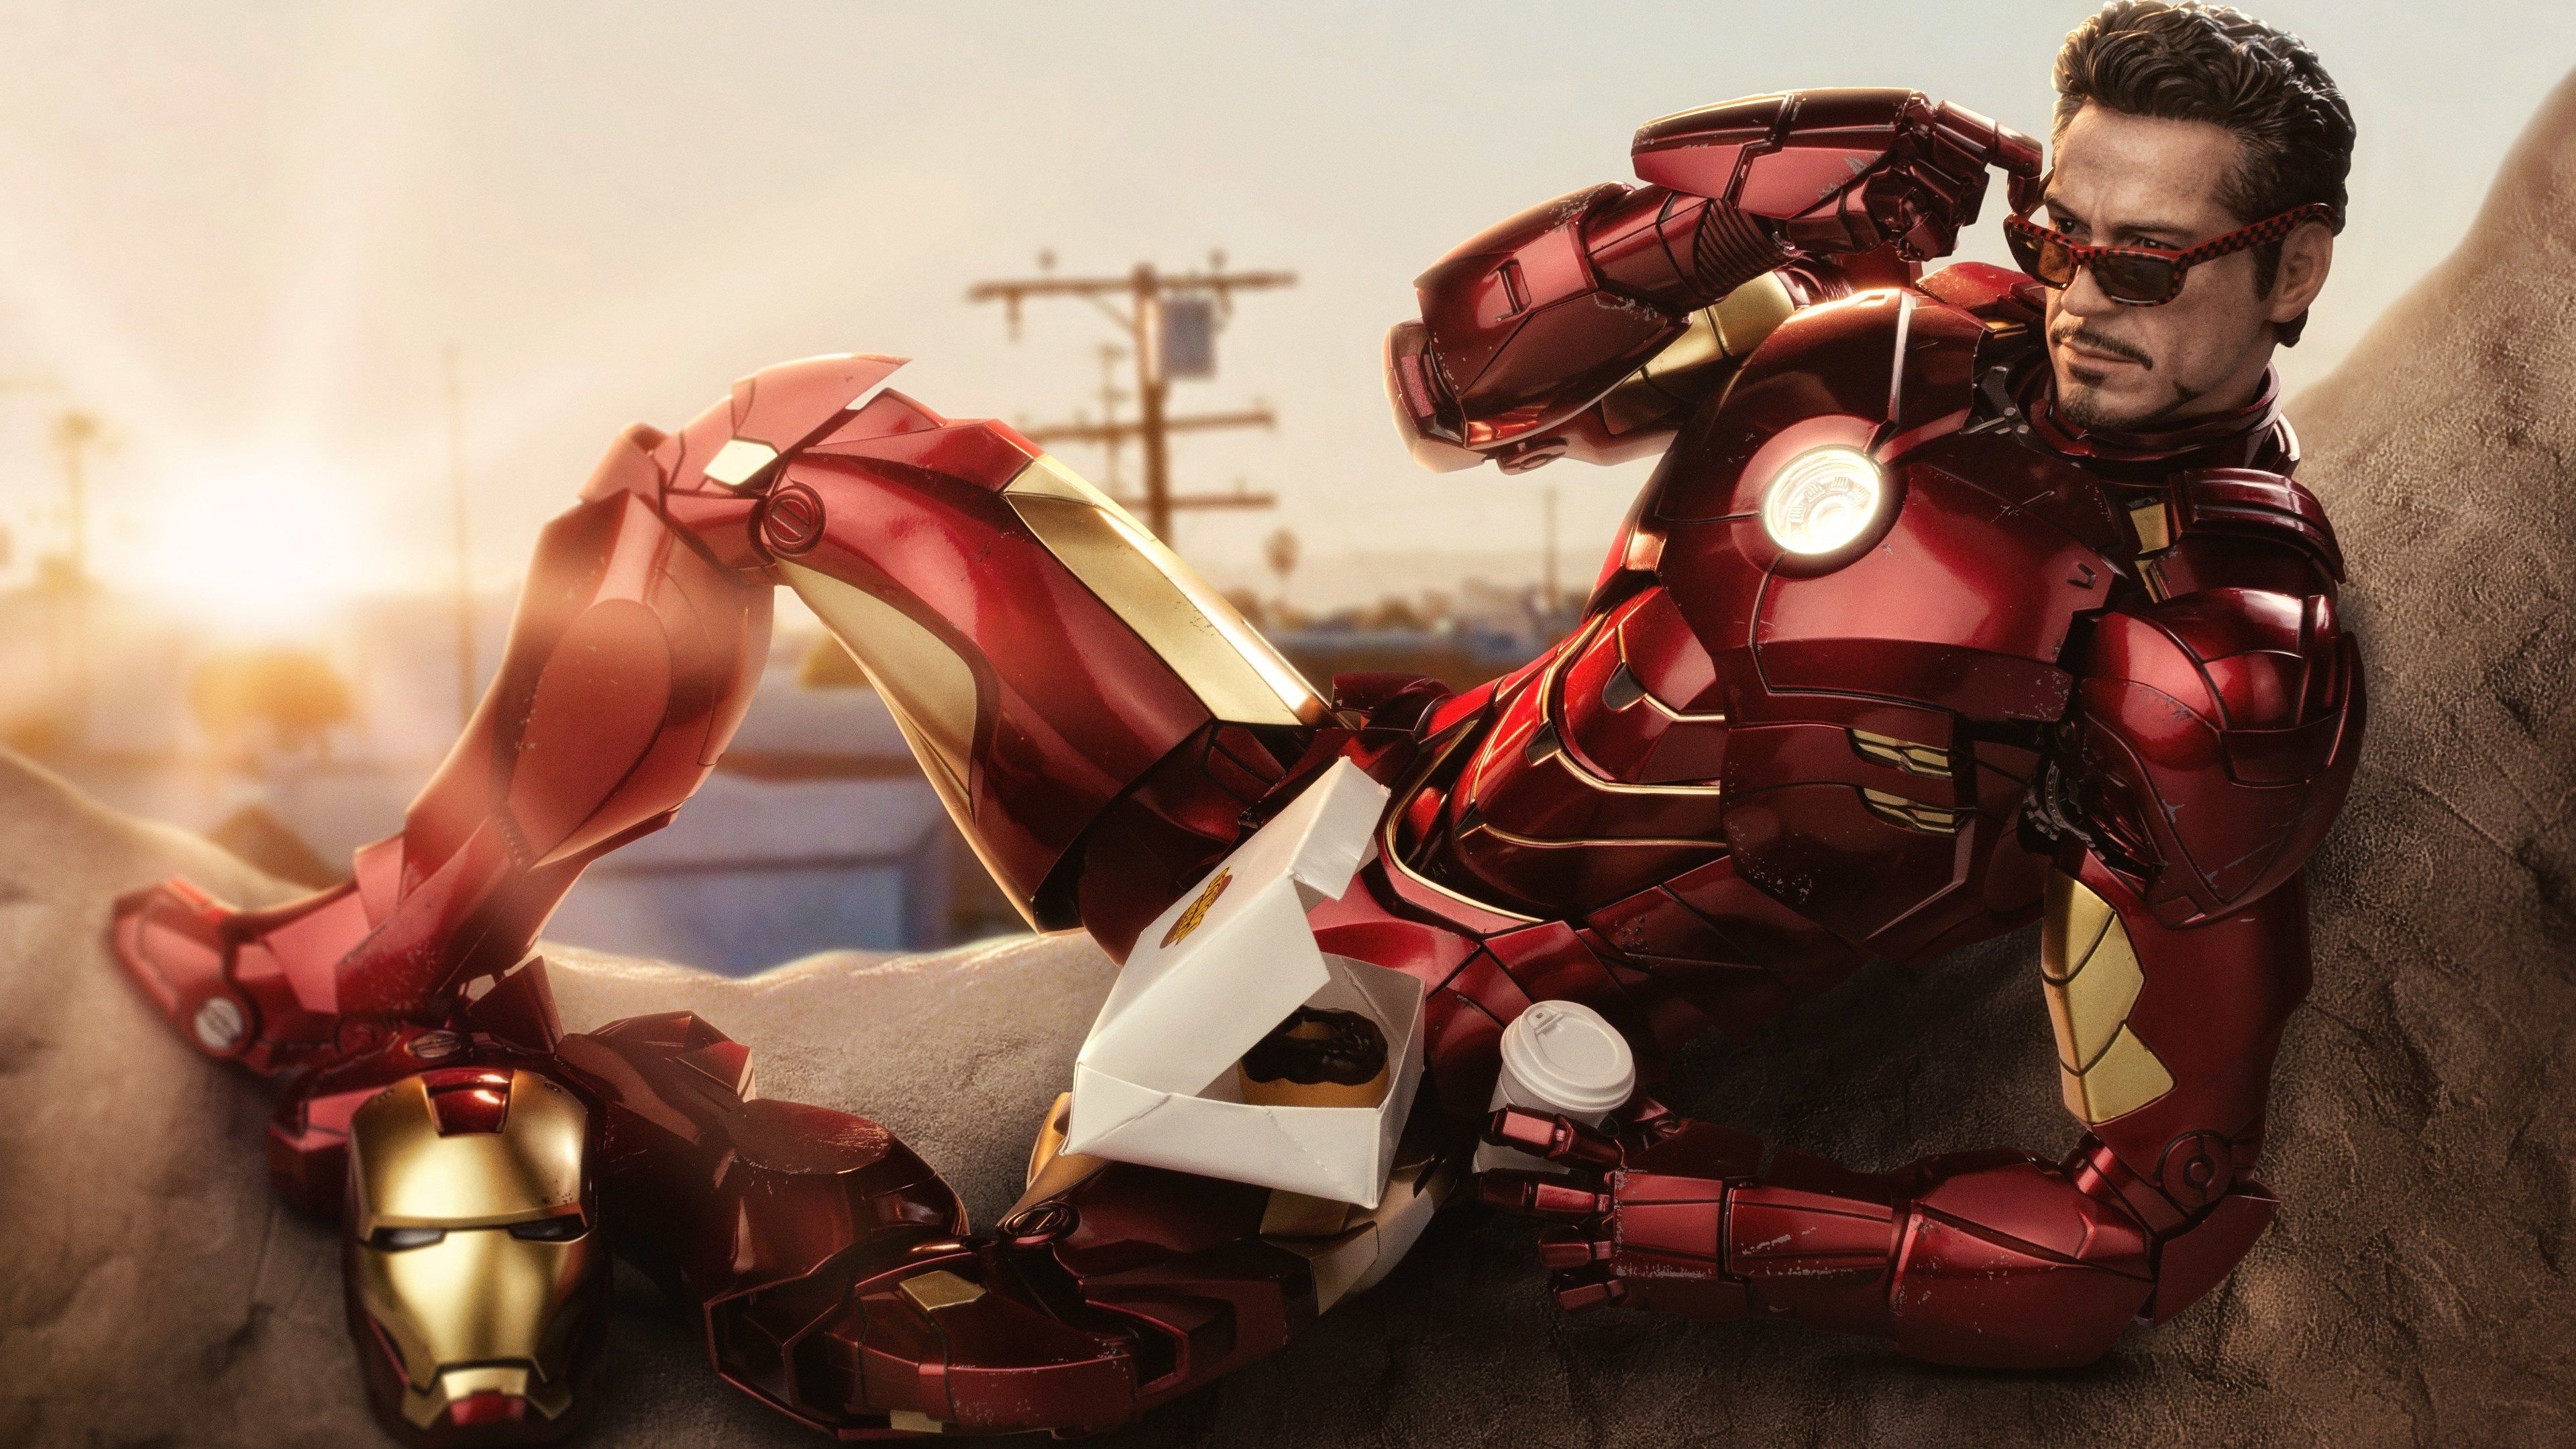 Wallpaper 4k Iron Man Eating Dunkin Donuts With Coffee 4k Wallpaper, 5k Wallpaper, Hd Wallpaper, Iron Man Wallpaper, Superheroes Wallpaper